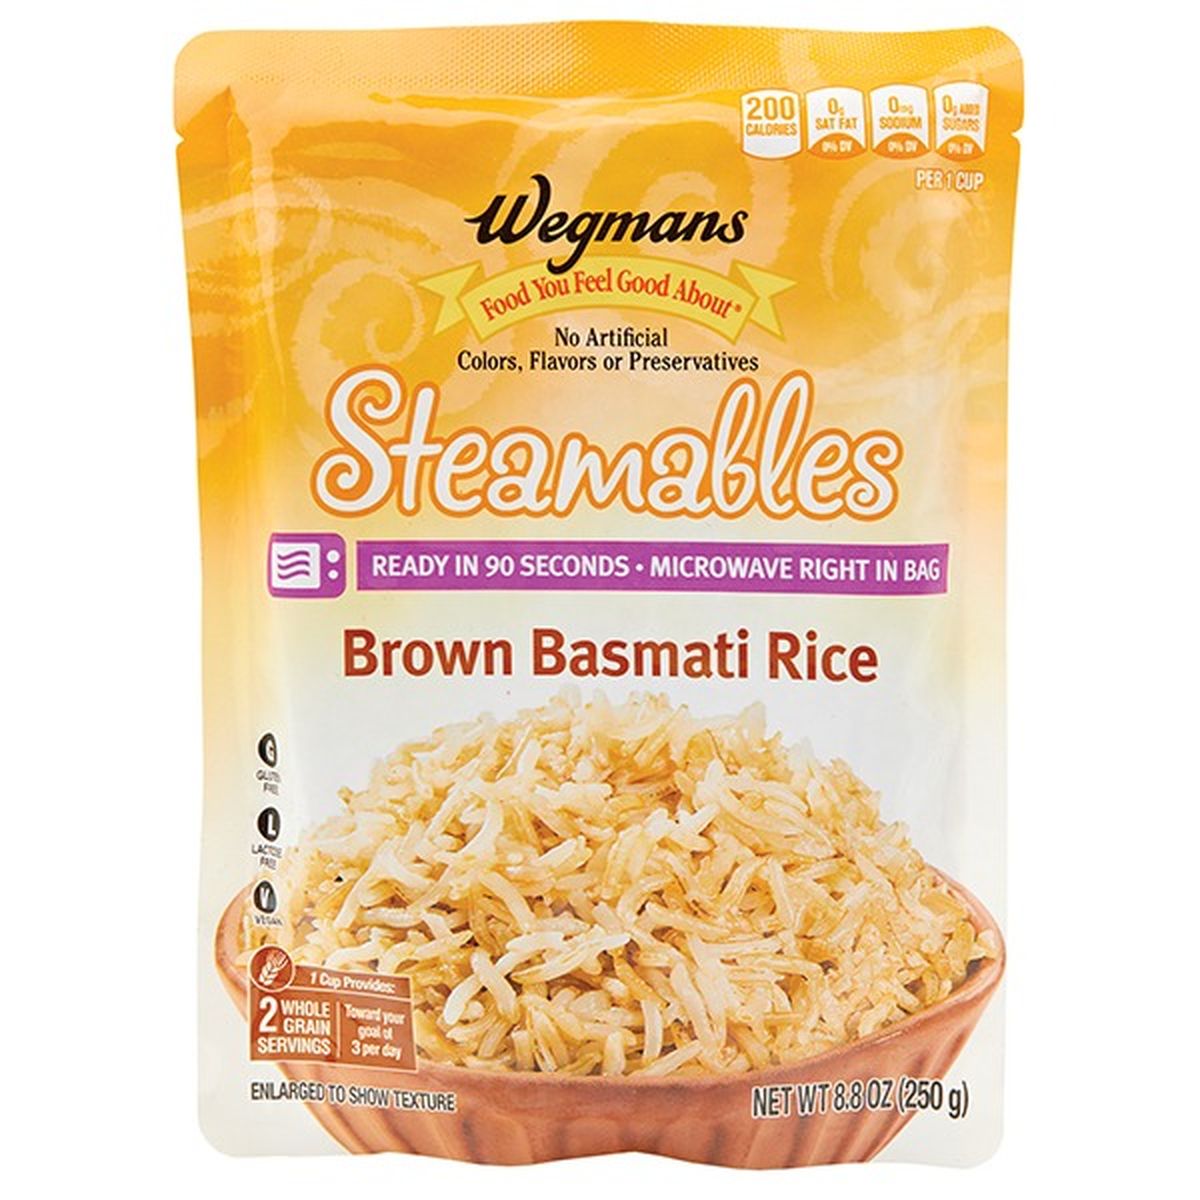 Calories in Wegmans Instant Steamable Brown Basmati Rice